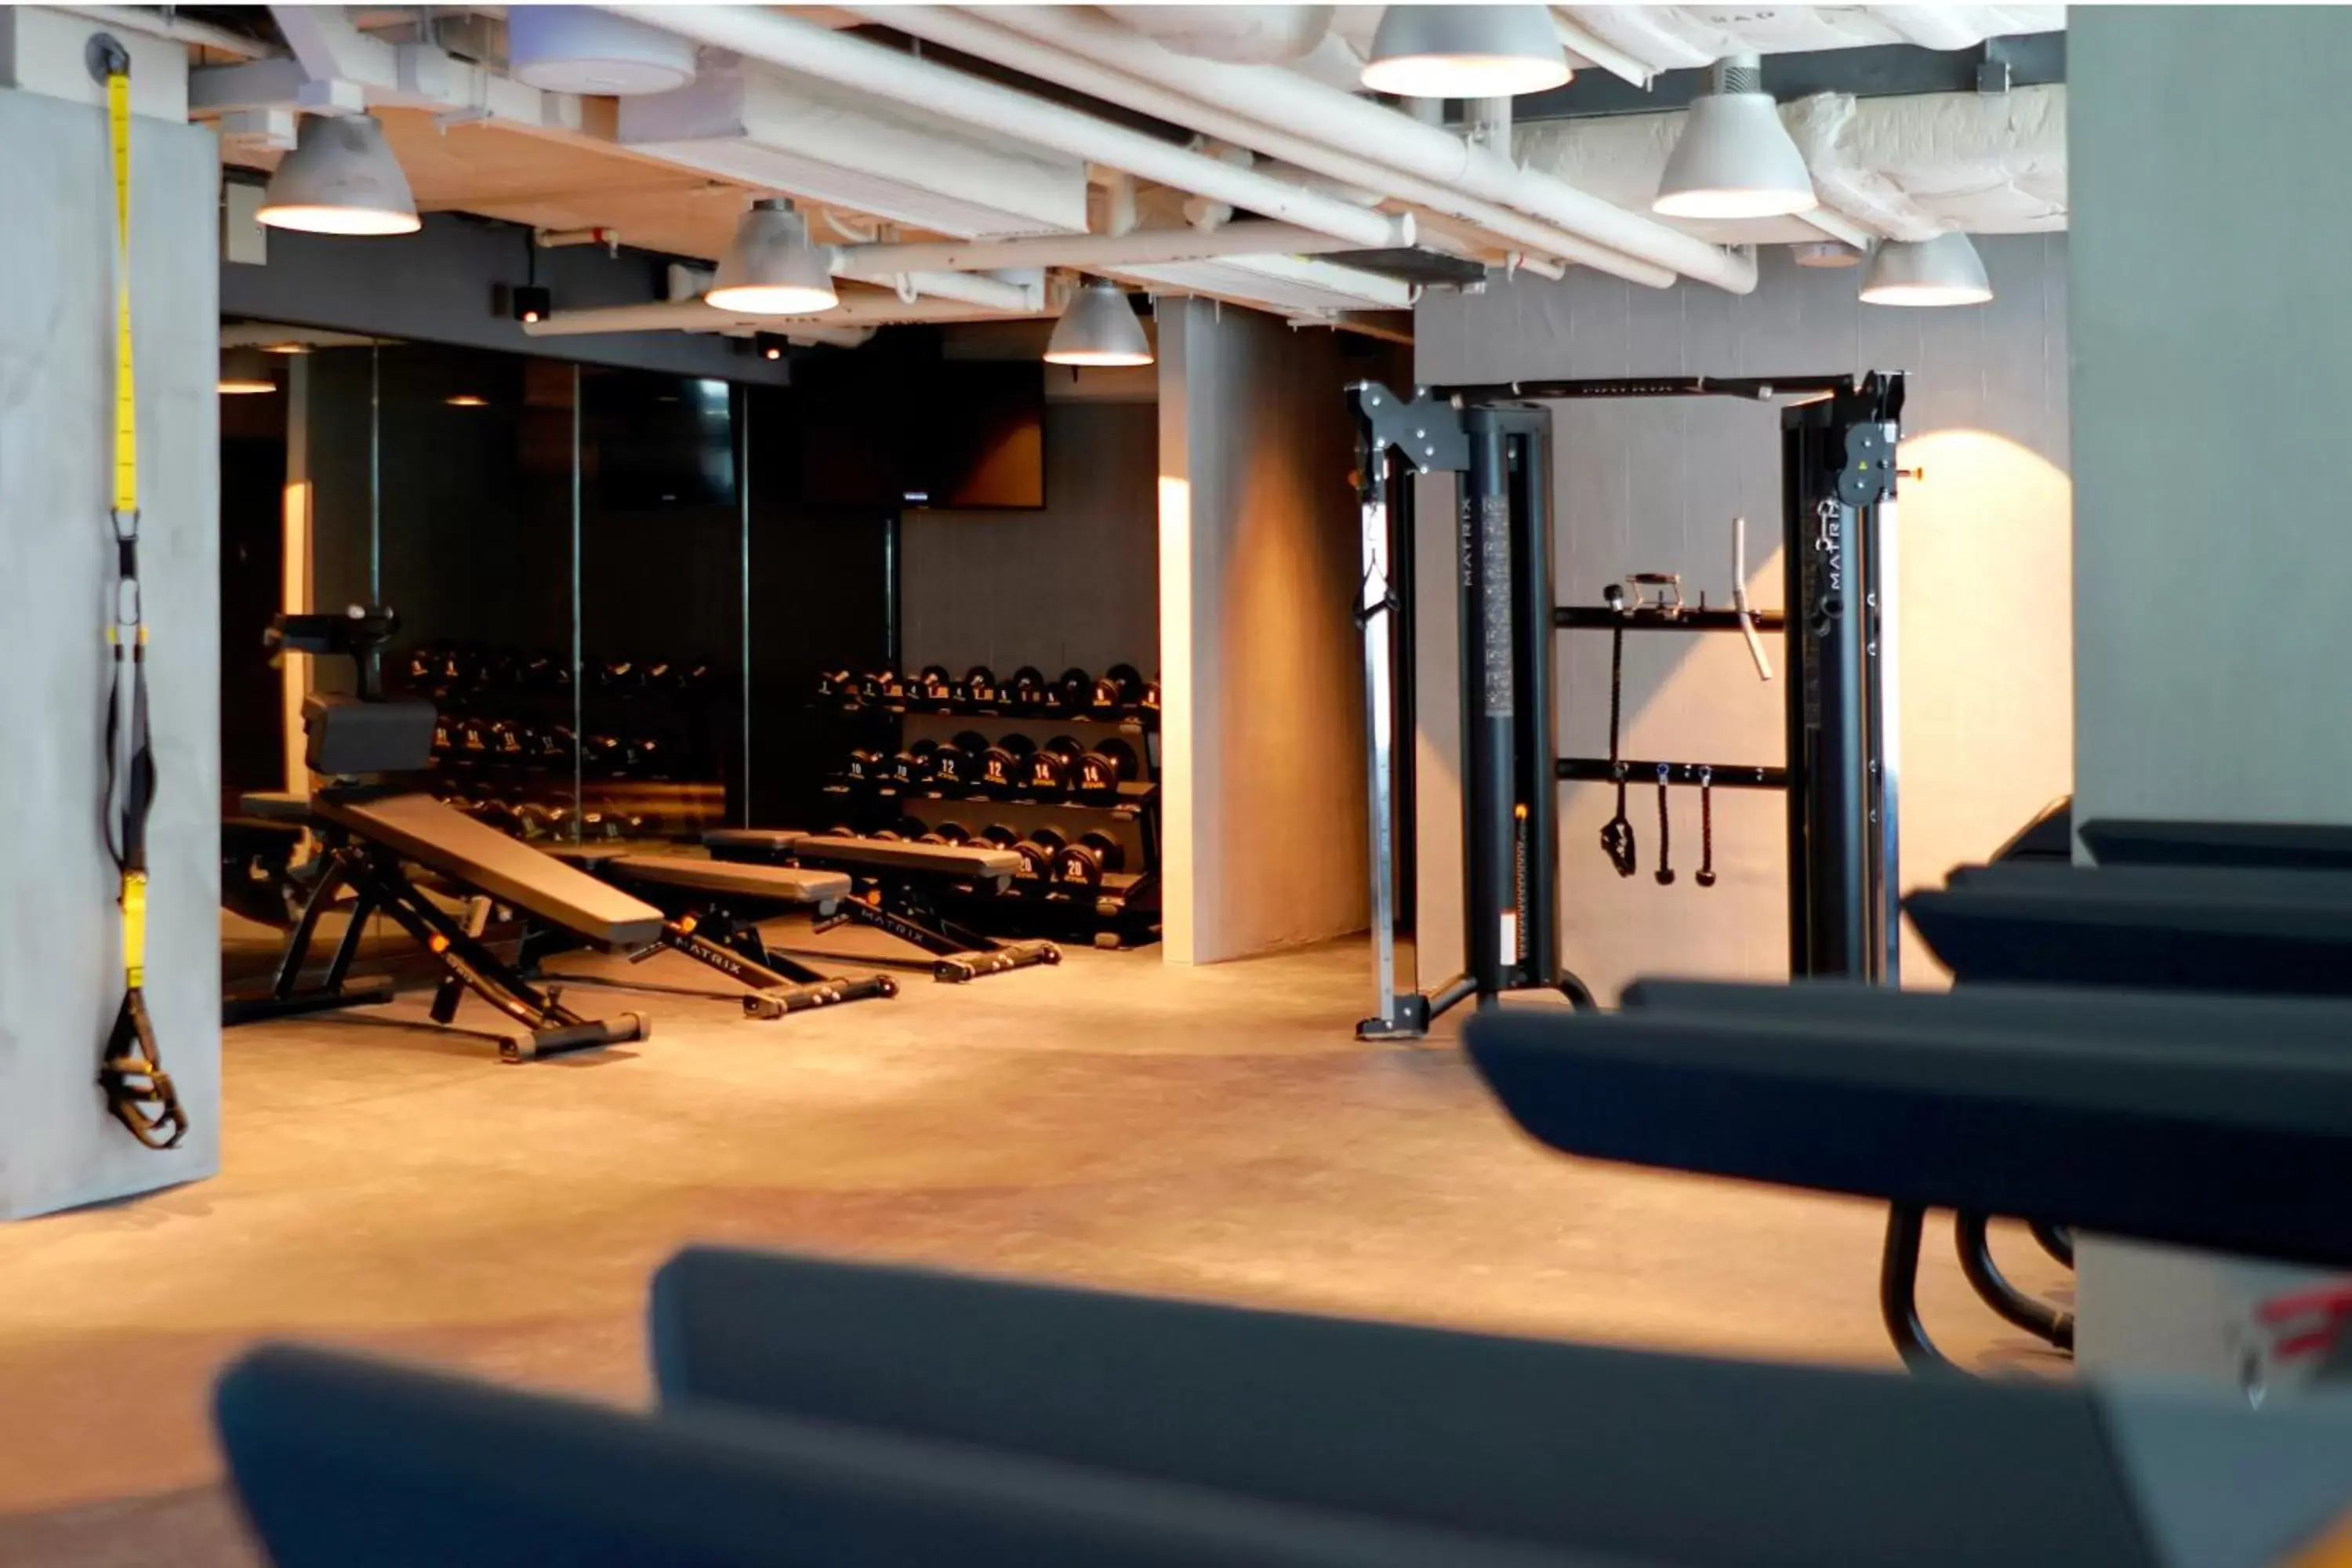 Fitness centre/facilities, Fitness Center/Facilities in the Arca